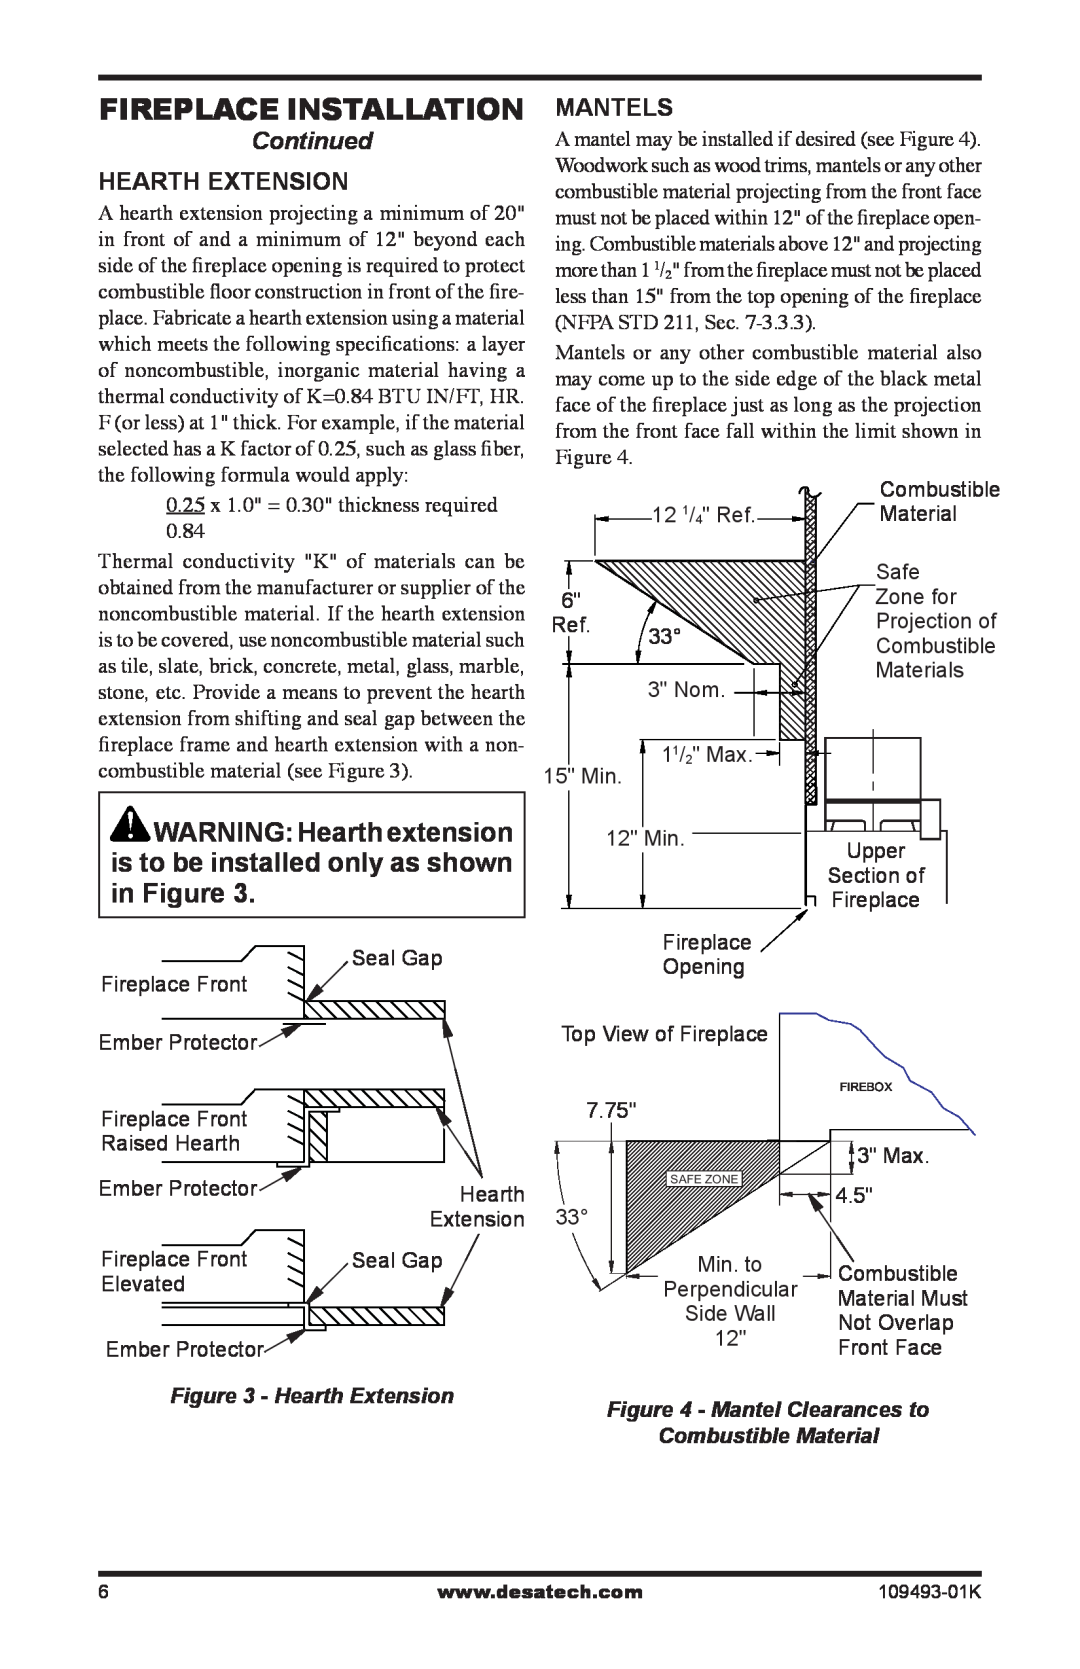 Desa ICBO# 3507 Fireplace Installation, WARNING Hearth extension, is to be installed only as shown in Figure, Continued 